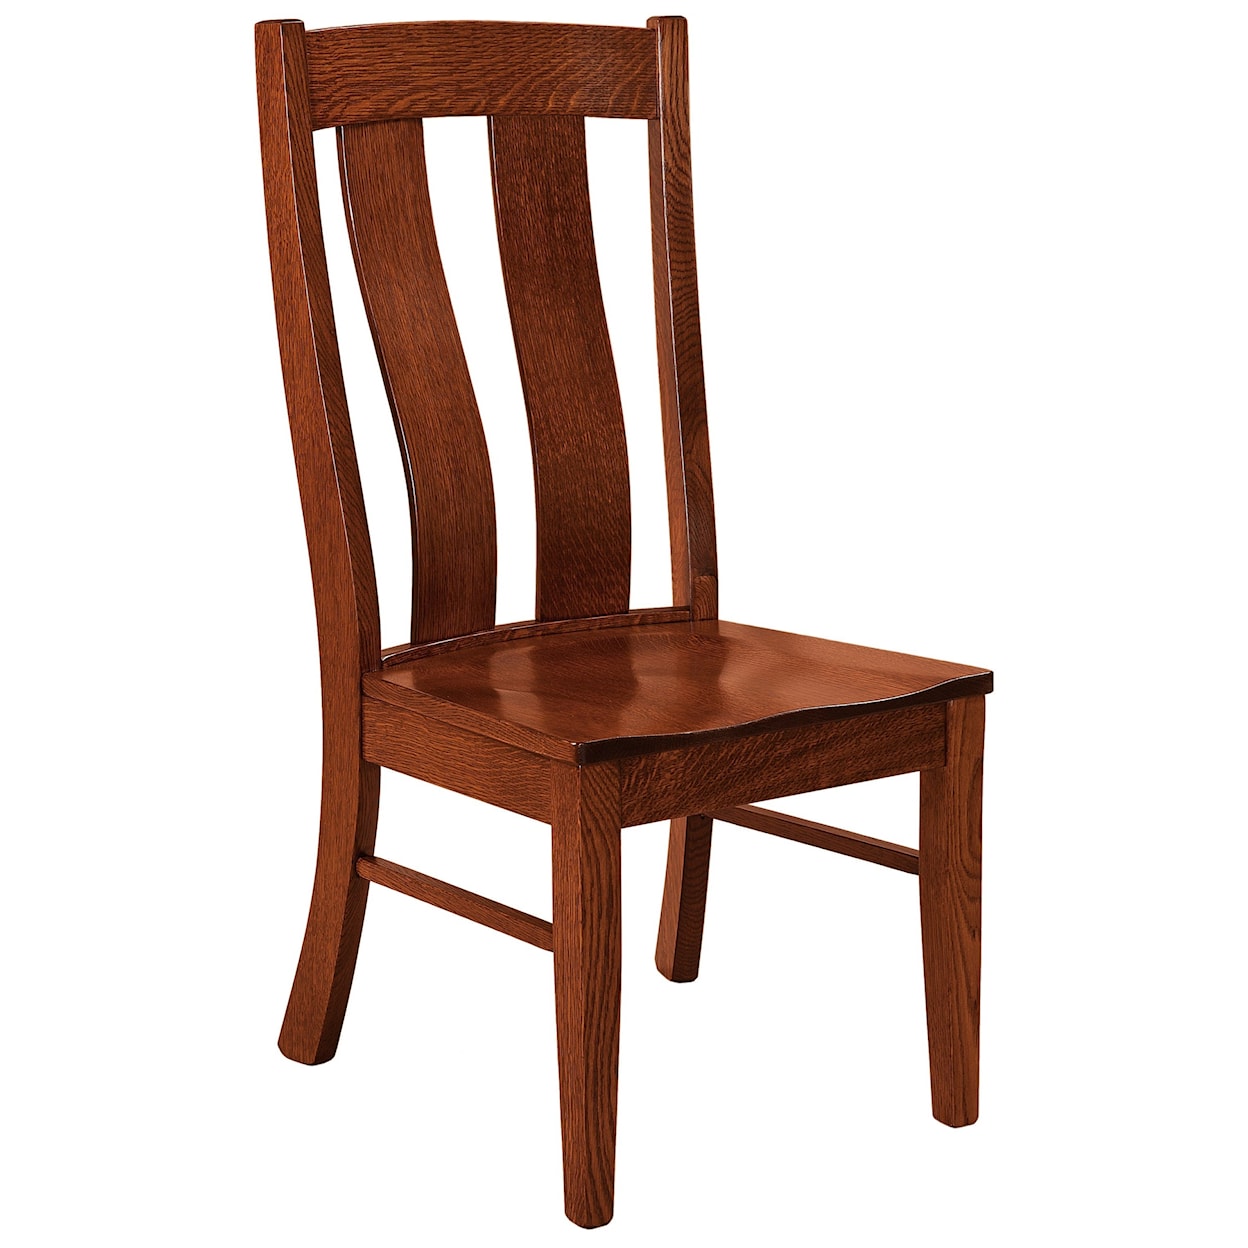 F&N Woodworking Laurie Side Chair - Wood Seat